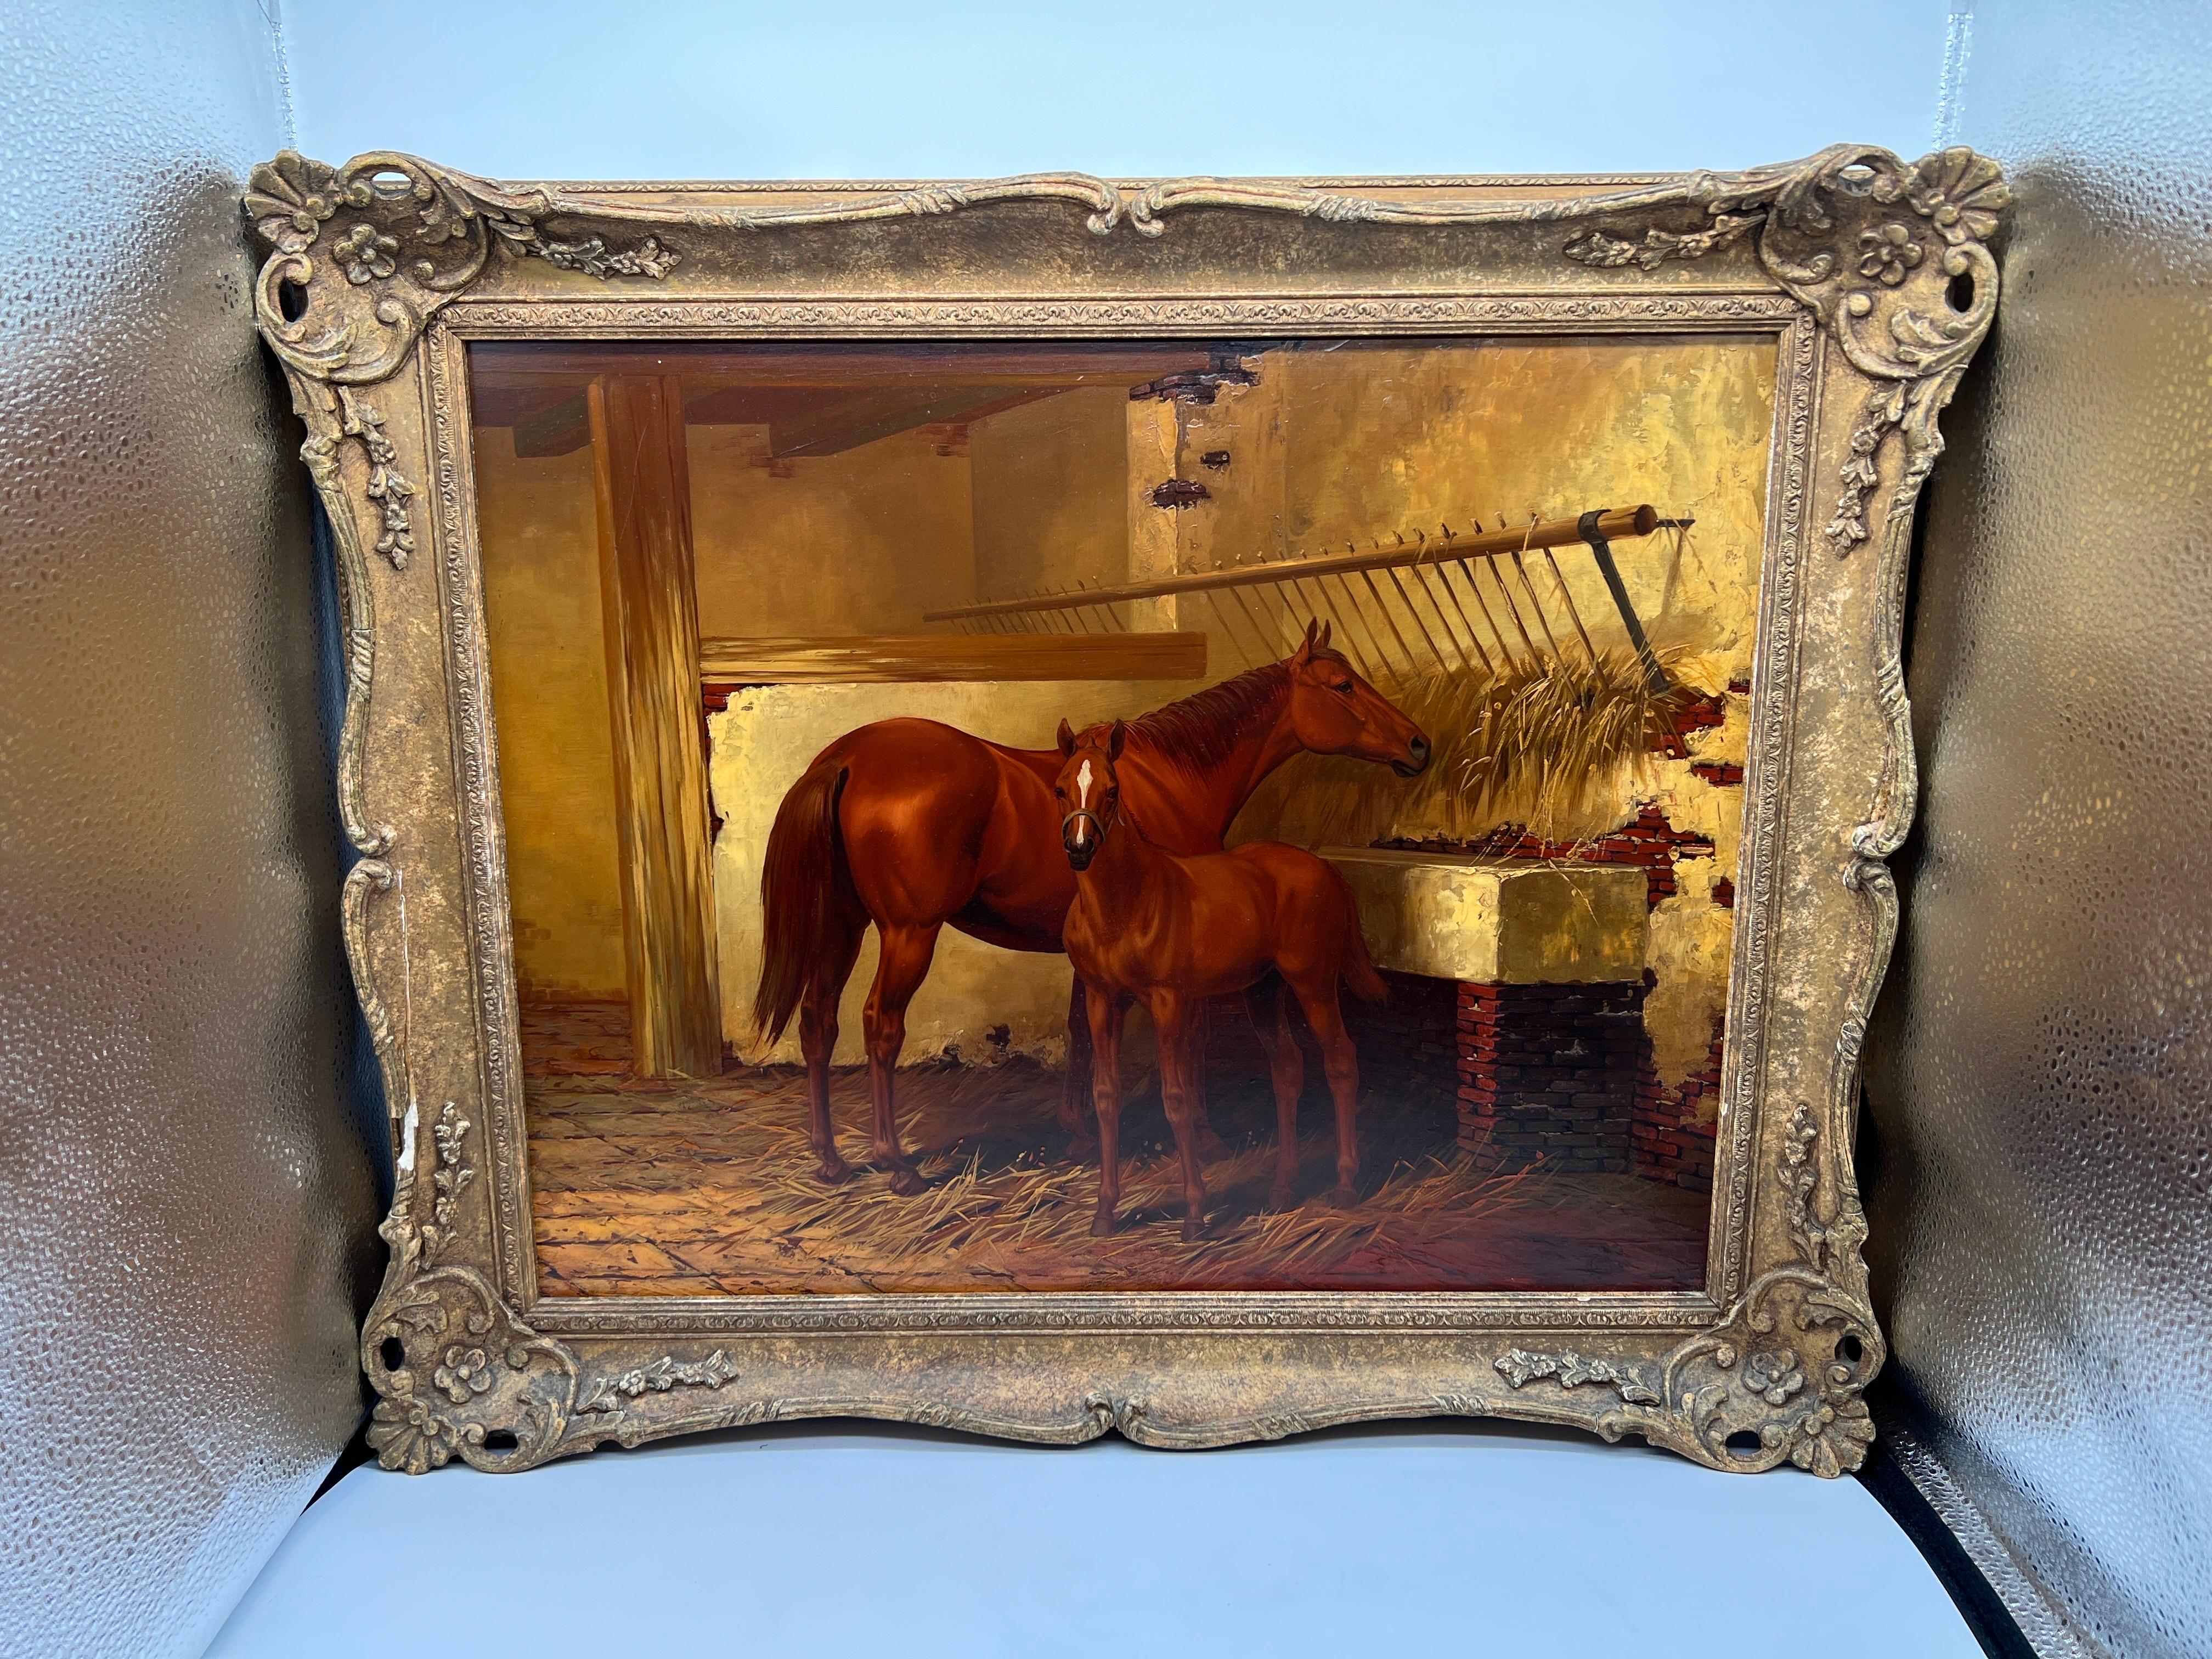 British or French School, late 19th century. 

A superb quality painting depicting an equestrian thoroughbred Mare & Foal, which are resting and feeding in a stable. The painting is signed to the lower right illegibly but quality indicates a quality